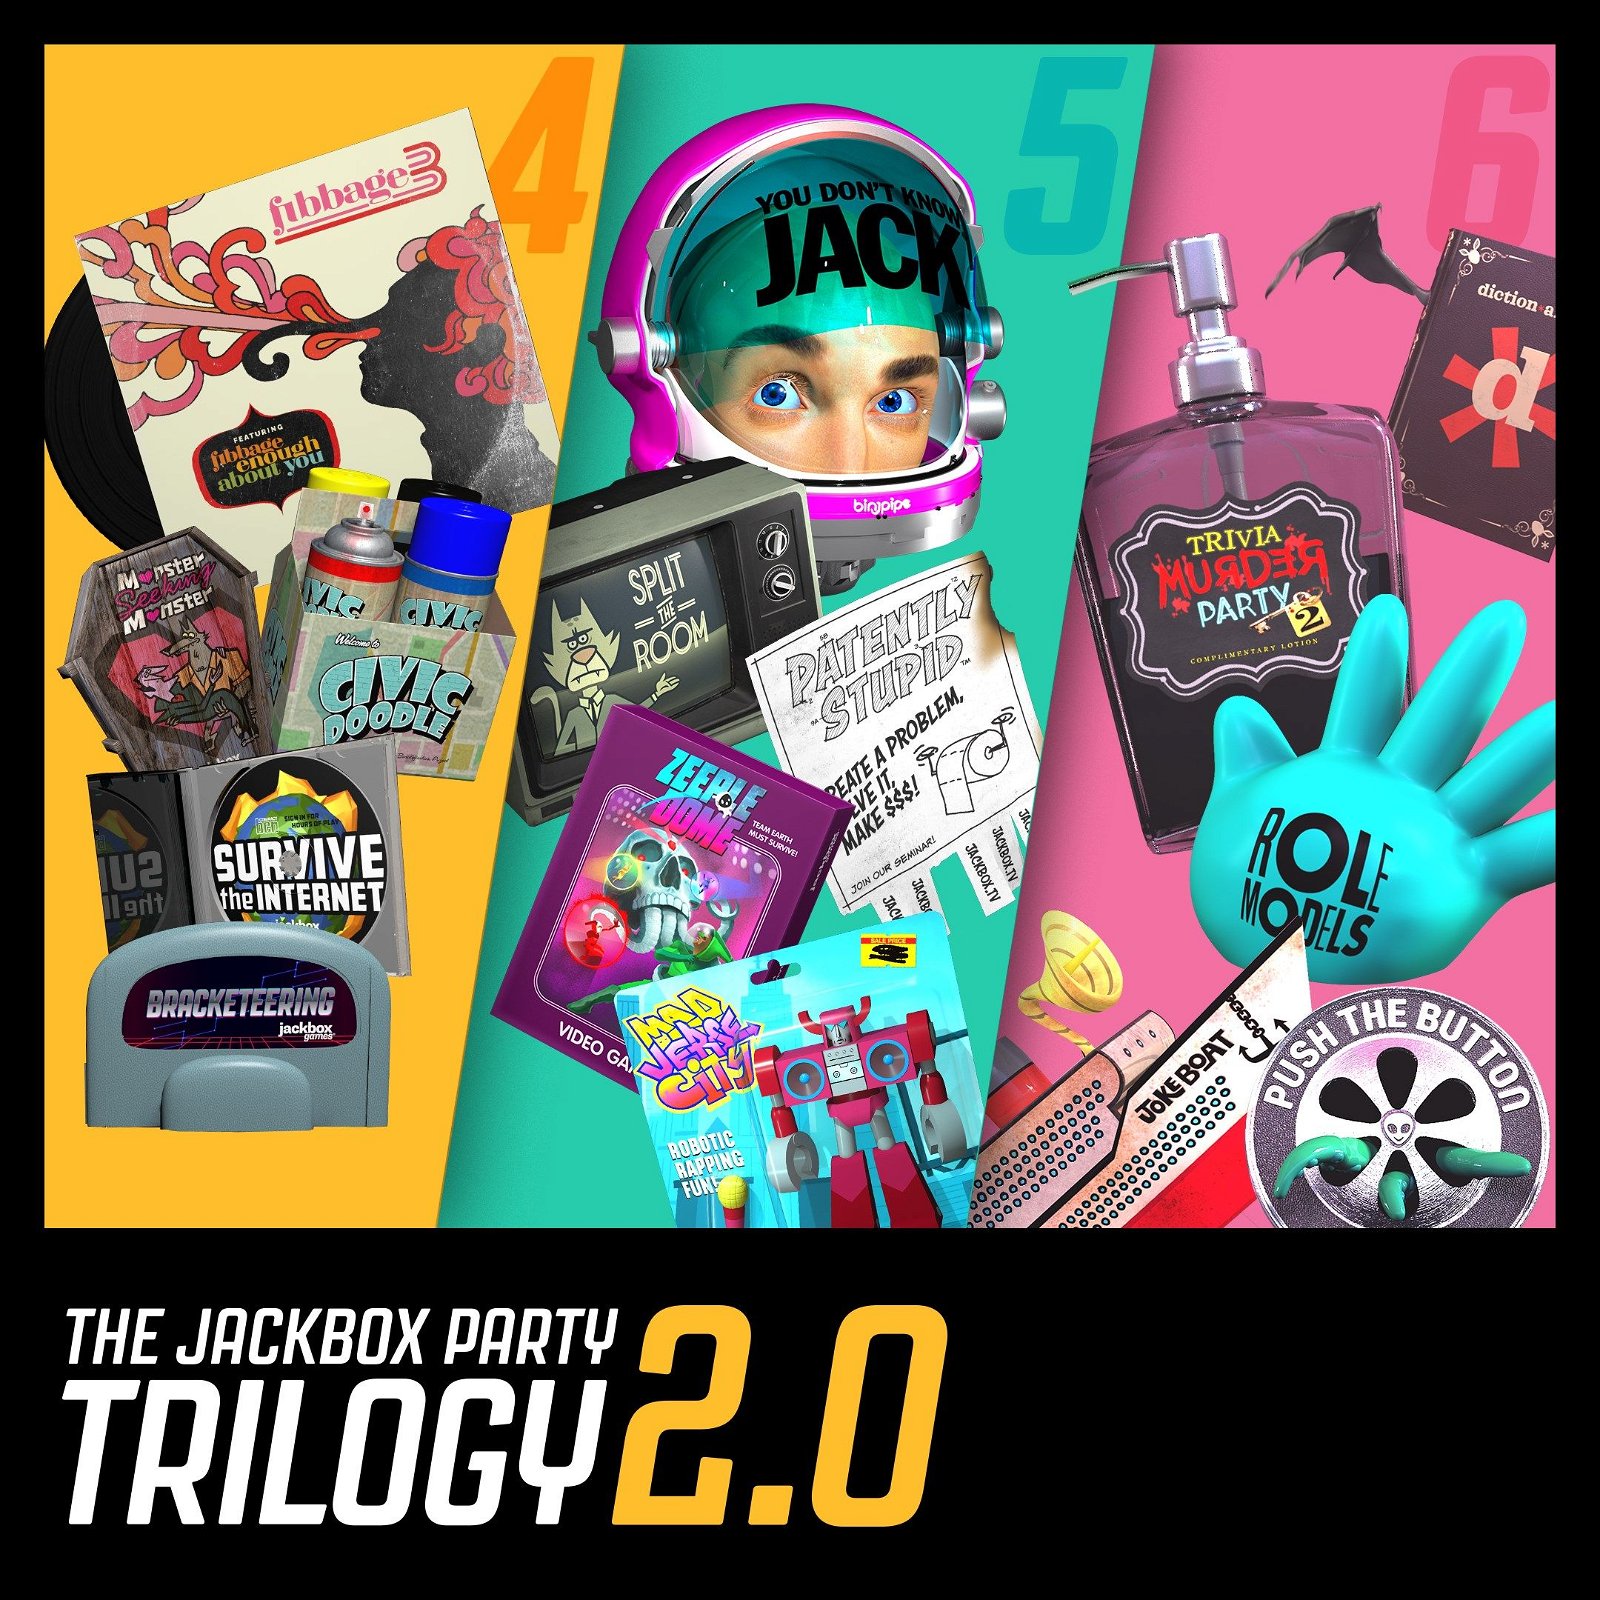 Image of The Jackbox Party Trilogy 2.0